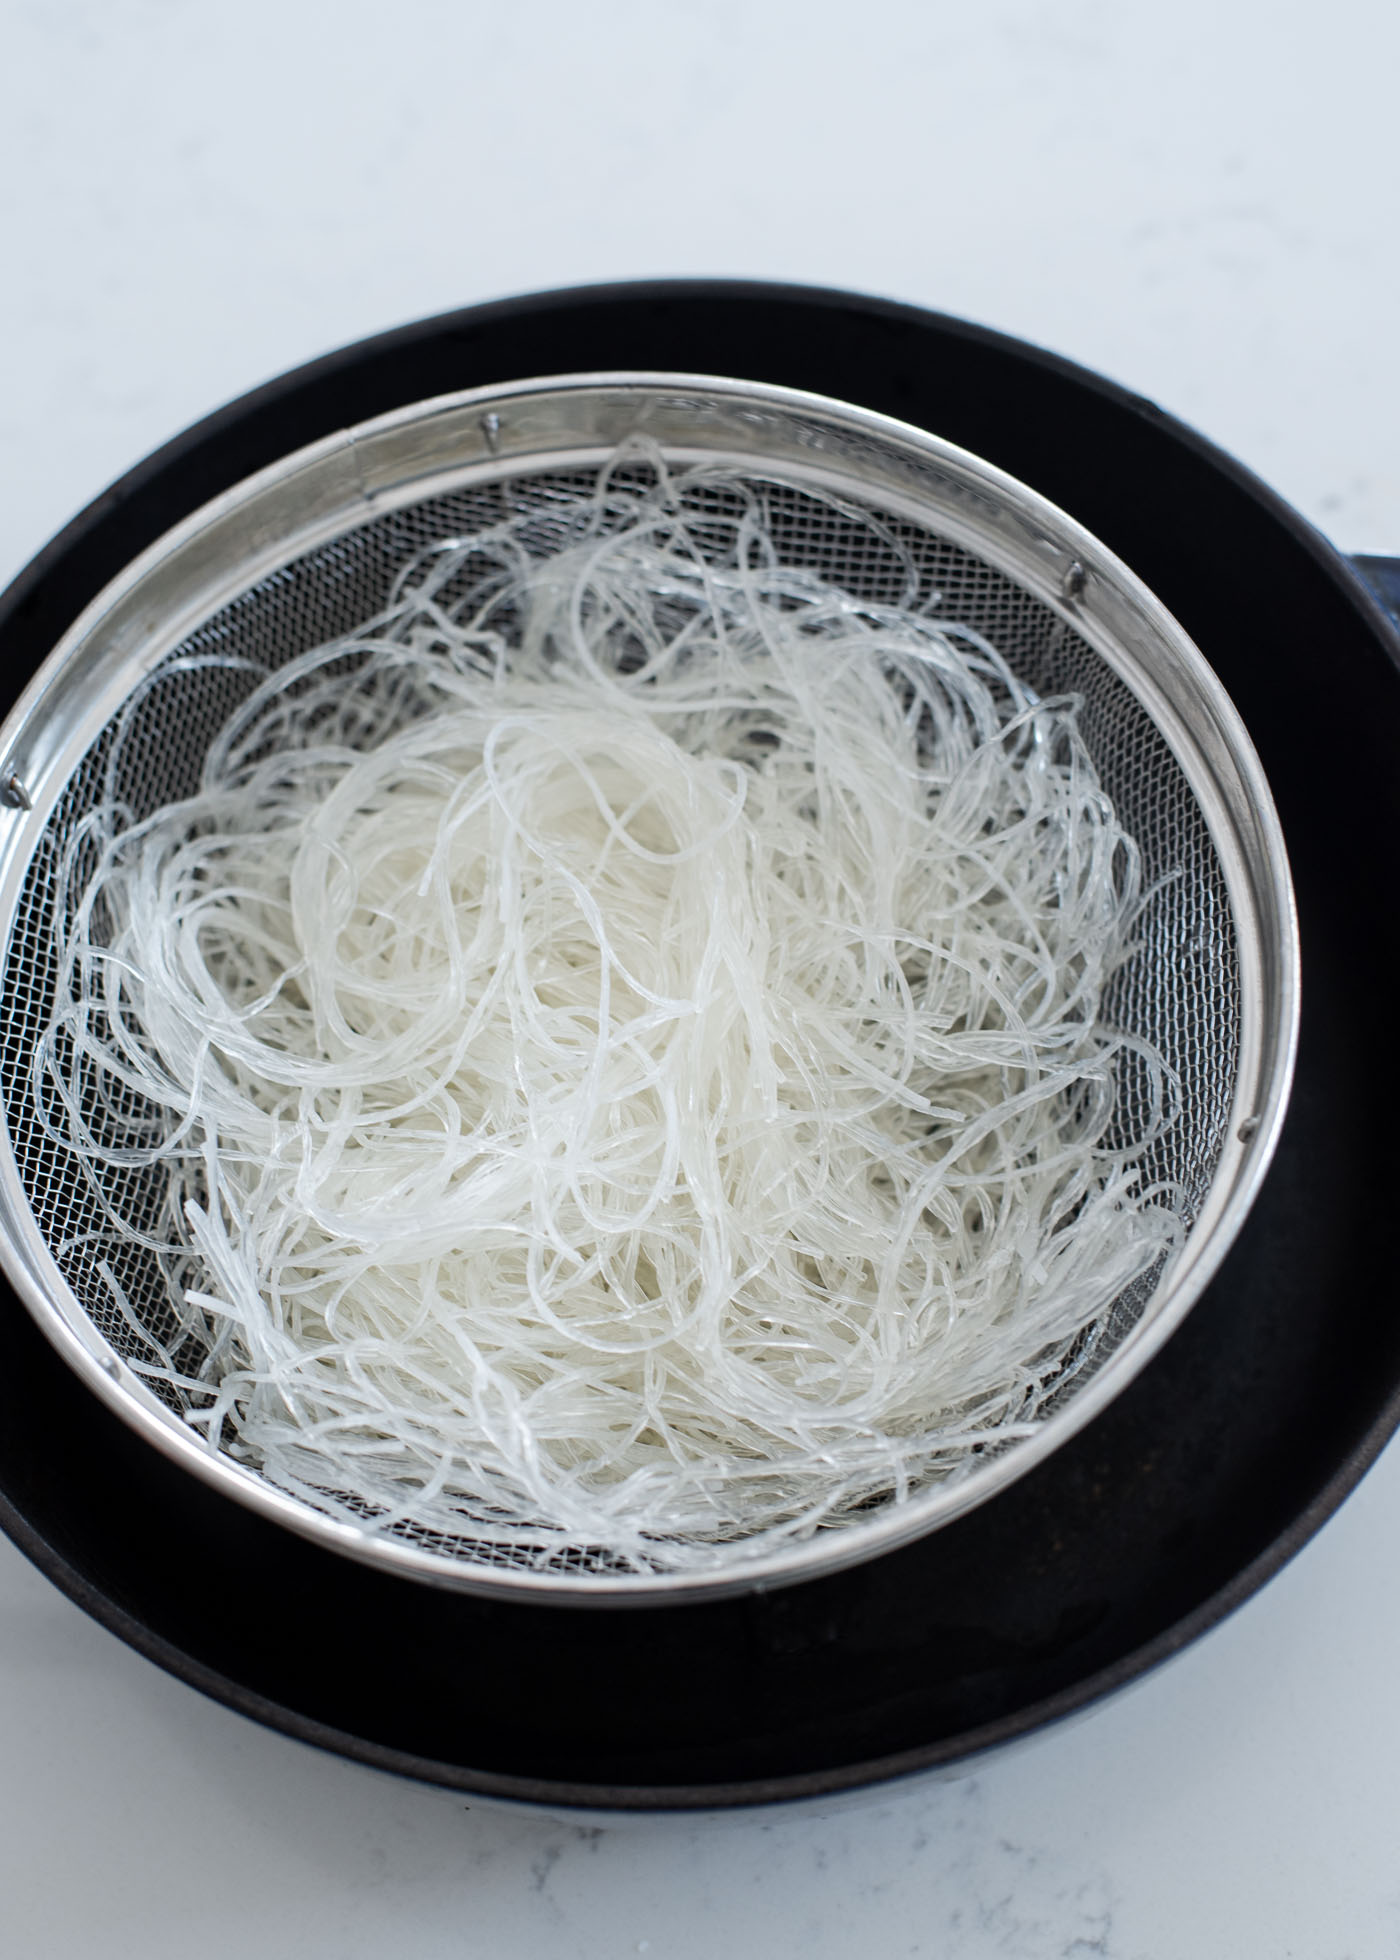 Soaked glass noodles are drained in a colander.